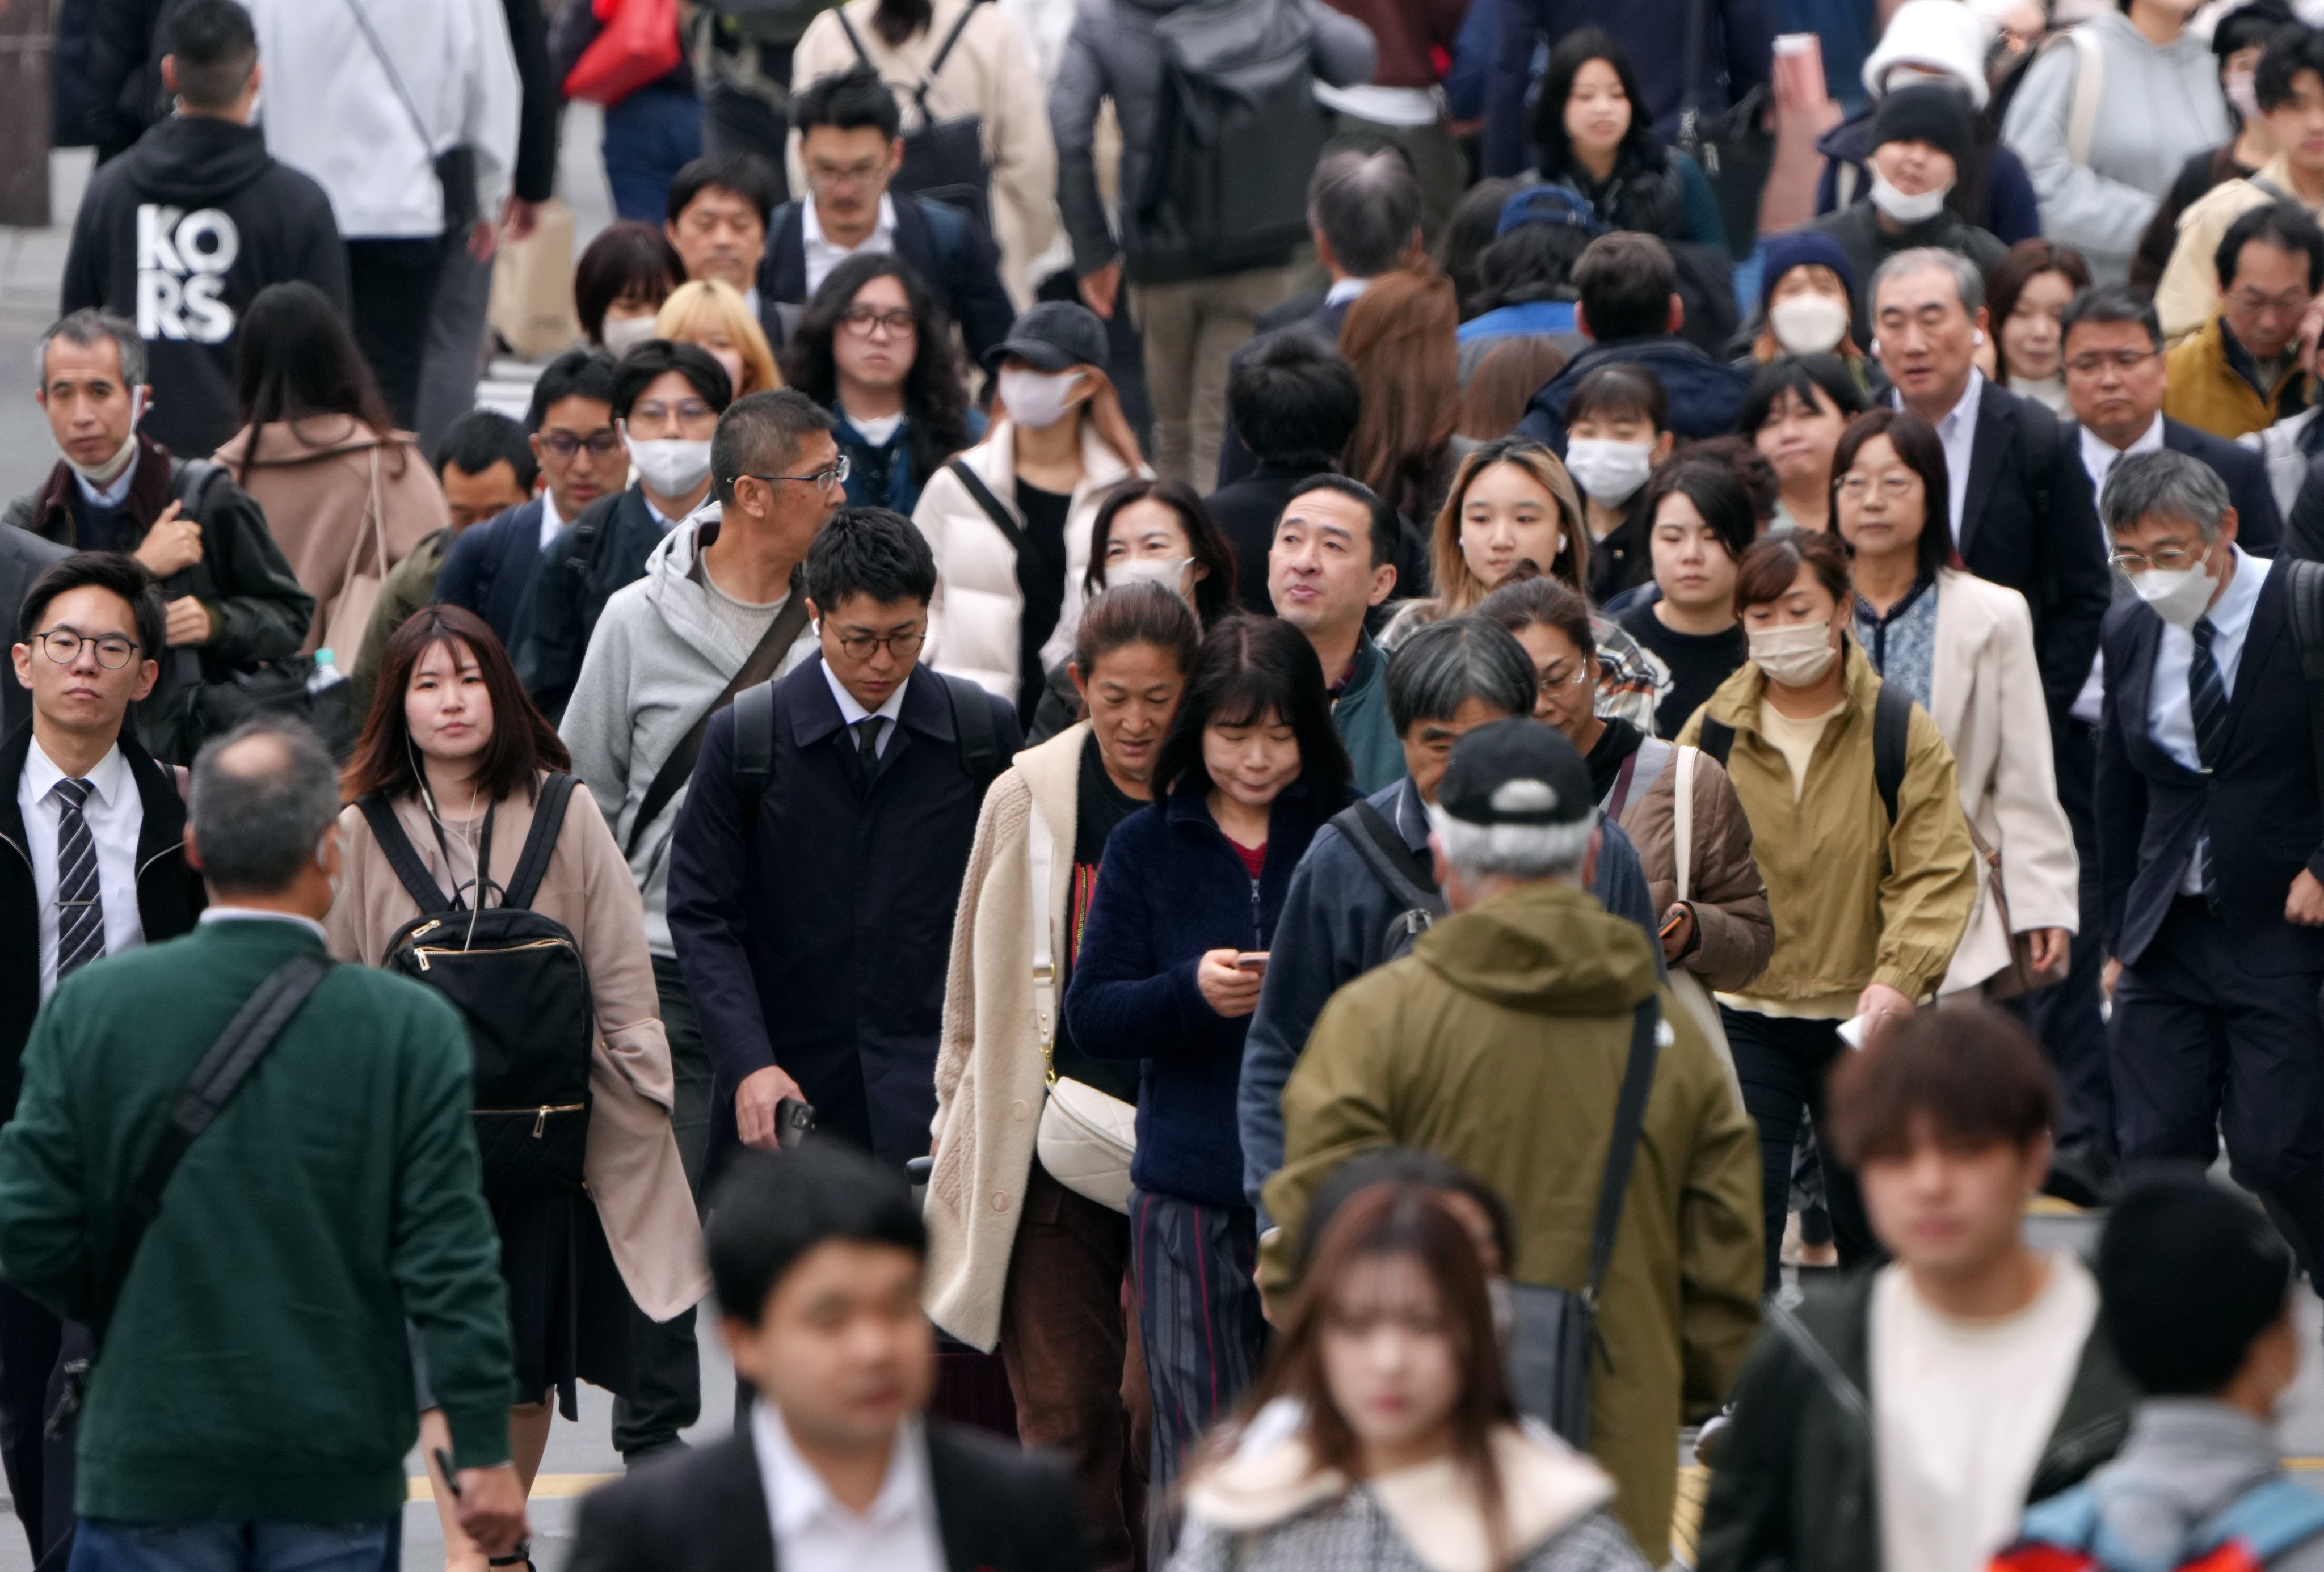 Commuters cross a street in Tokyo. More than 60 per cent of respondents to a new survey support the government’s policy of granting more visas to skilled foreign workers. Photo: EPA-EFE